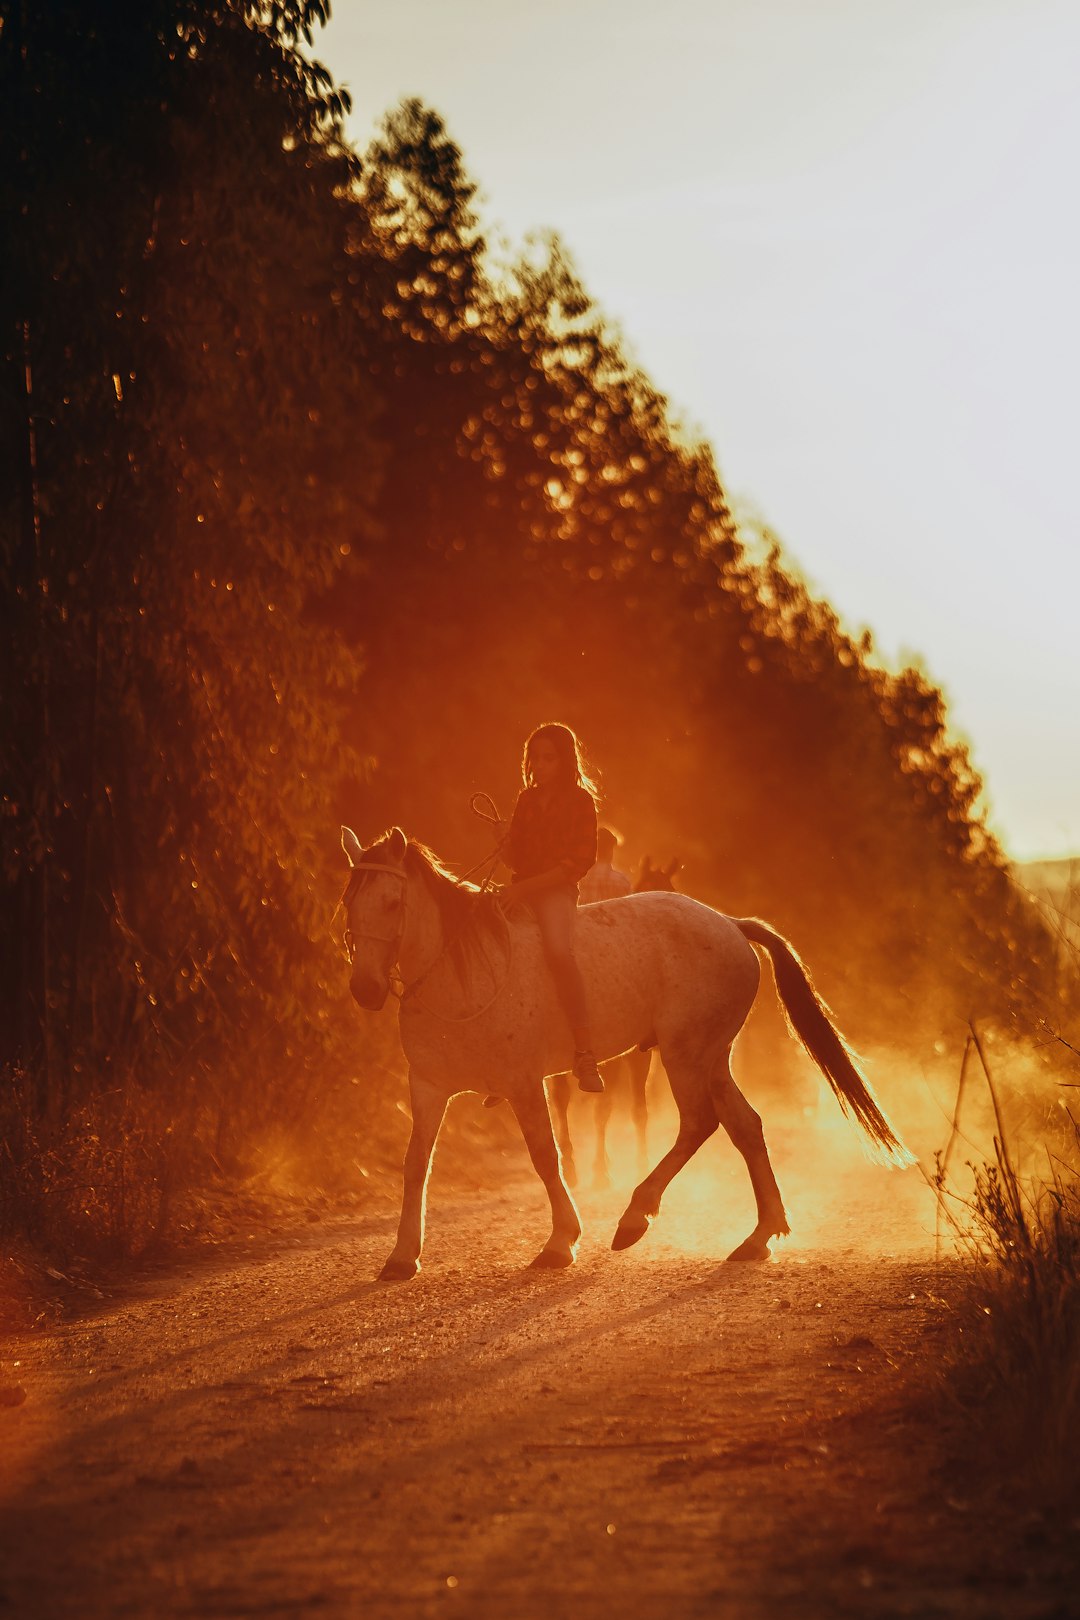 man riding horse on dirt road during sunset